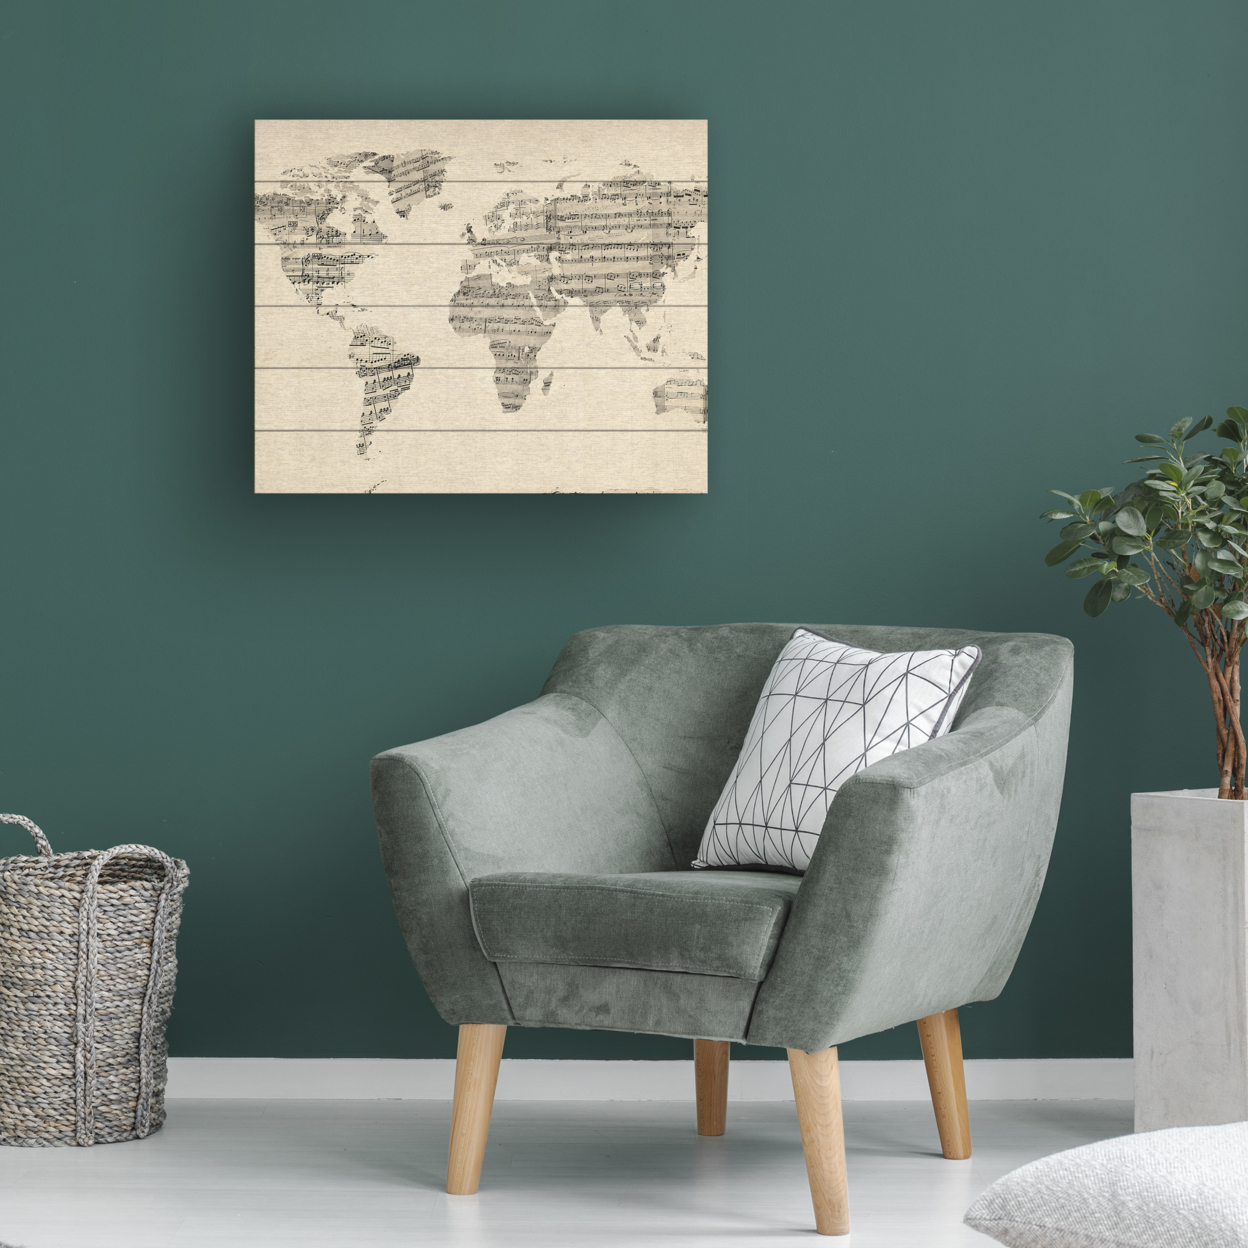 Wooden Slat Art 18 X 22 Inches Titled Old Sheet Music World Map Ready To Hang Home Decor Picture